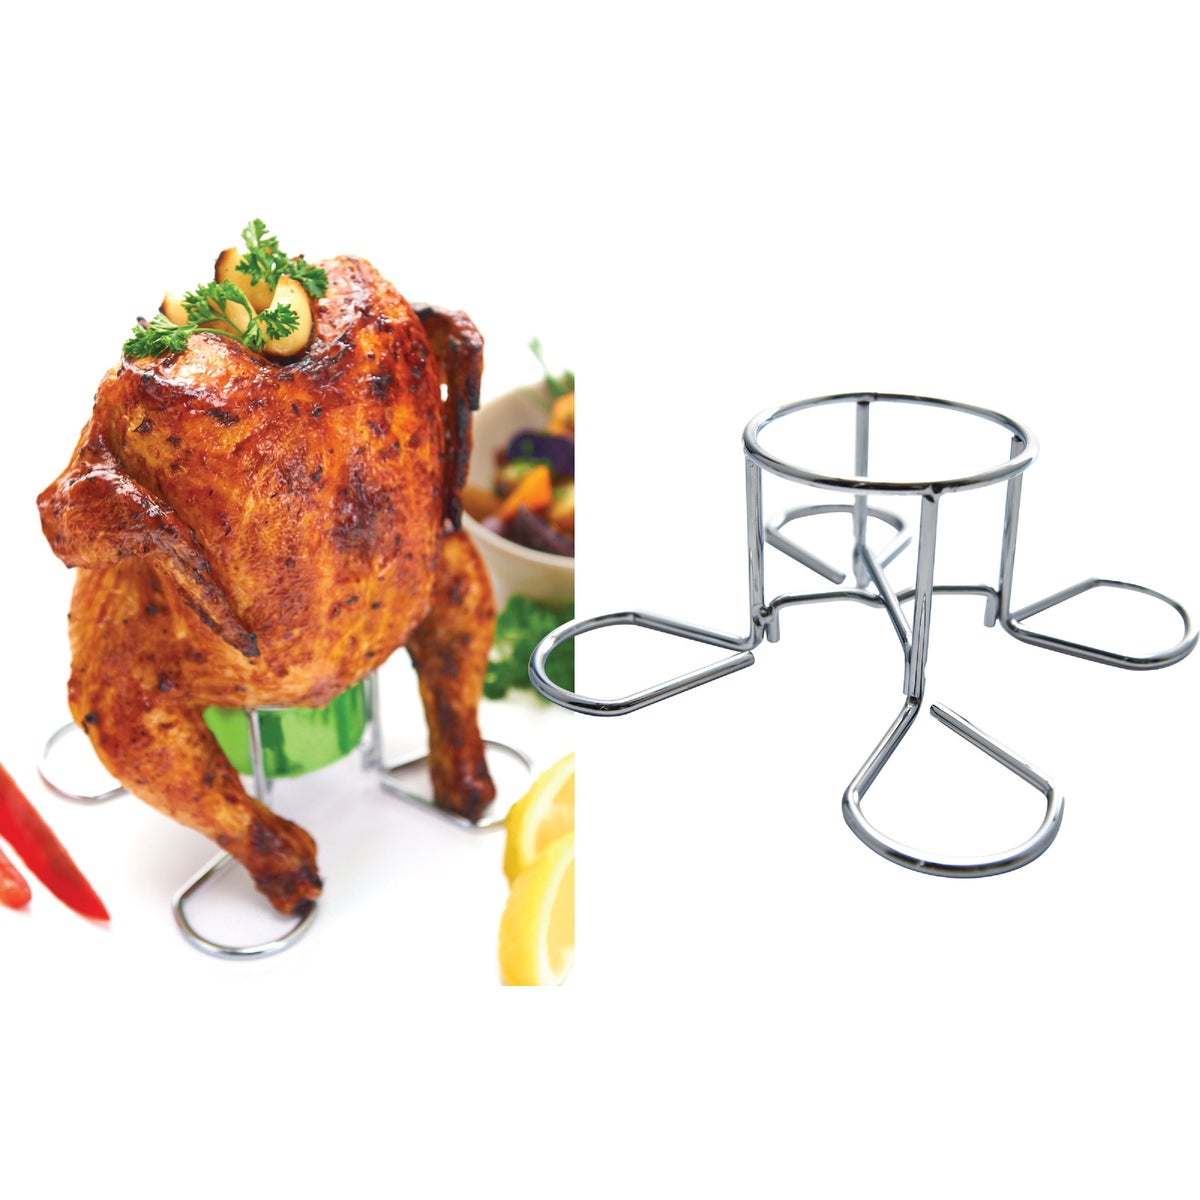 Item 806013, Chrome wire chicken roaster to give a stable platform to cook your beer can